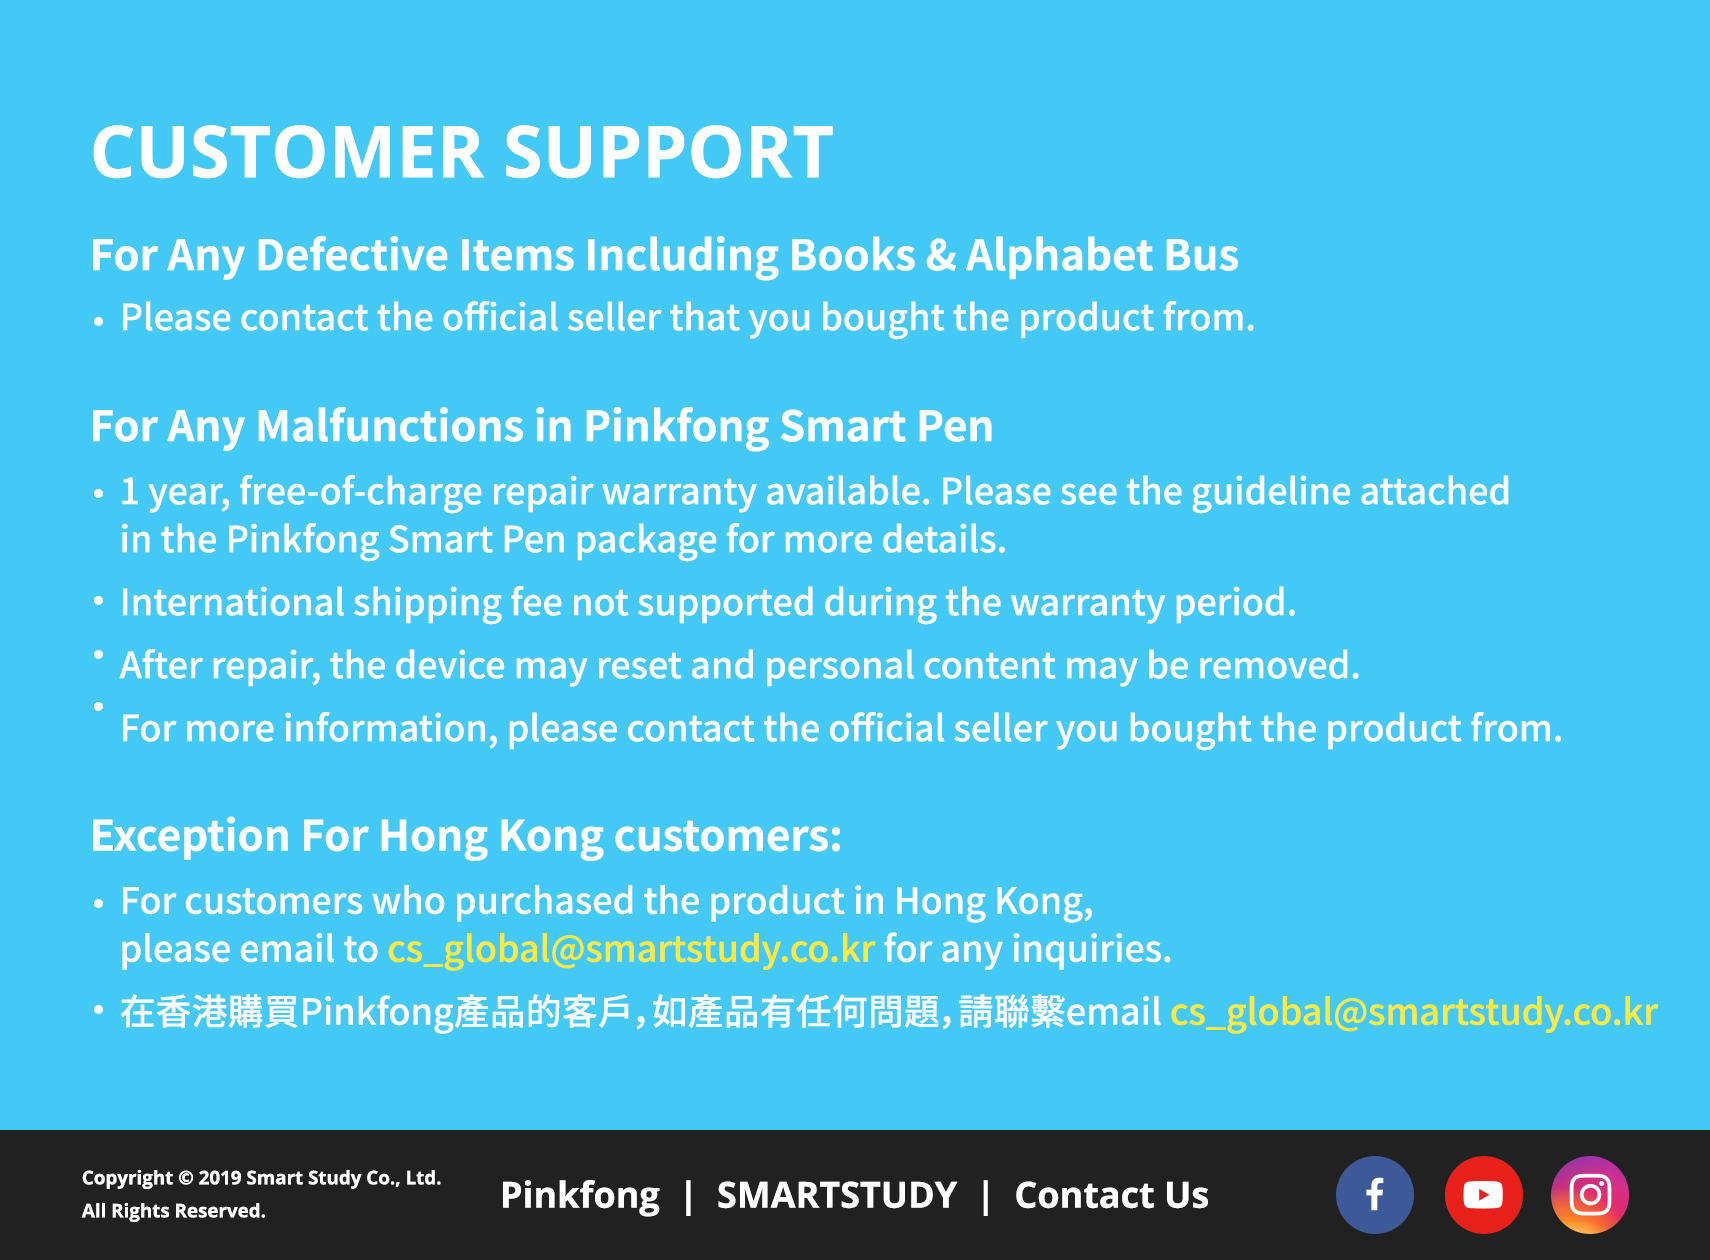 CUSTOMER SUPPORT. For Any Defective Items Including Books & Alphabet Bus: Please contact the official seller that you bought the product from. For Any Malfunctions in Pinkfong Smart Pen: 1 year, free-of-charge repair warranty available. Please see the guideline attached in the Pinkfong Smart Pen package for more details. International shipping fee not supported during the warranty period.
                        After repair, the device may reset and personal content may be removed. For more information, please contact the official seller you bought the product from.